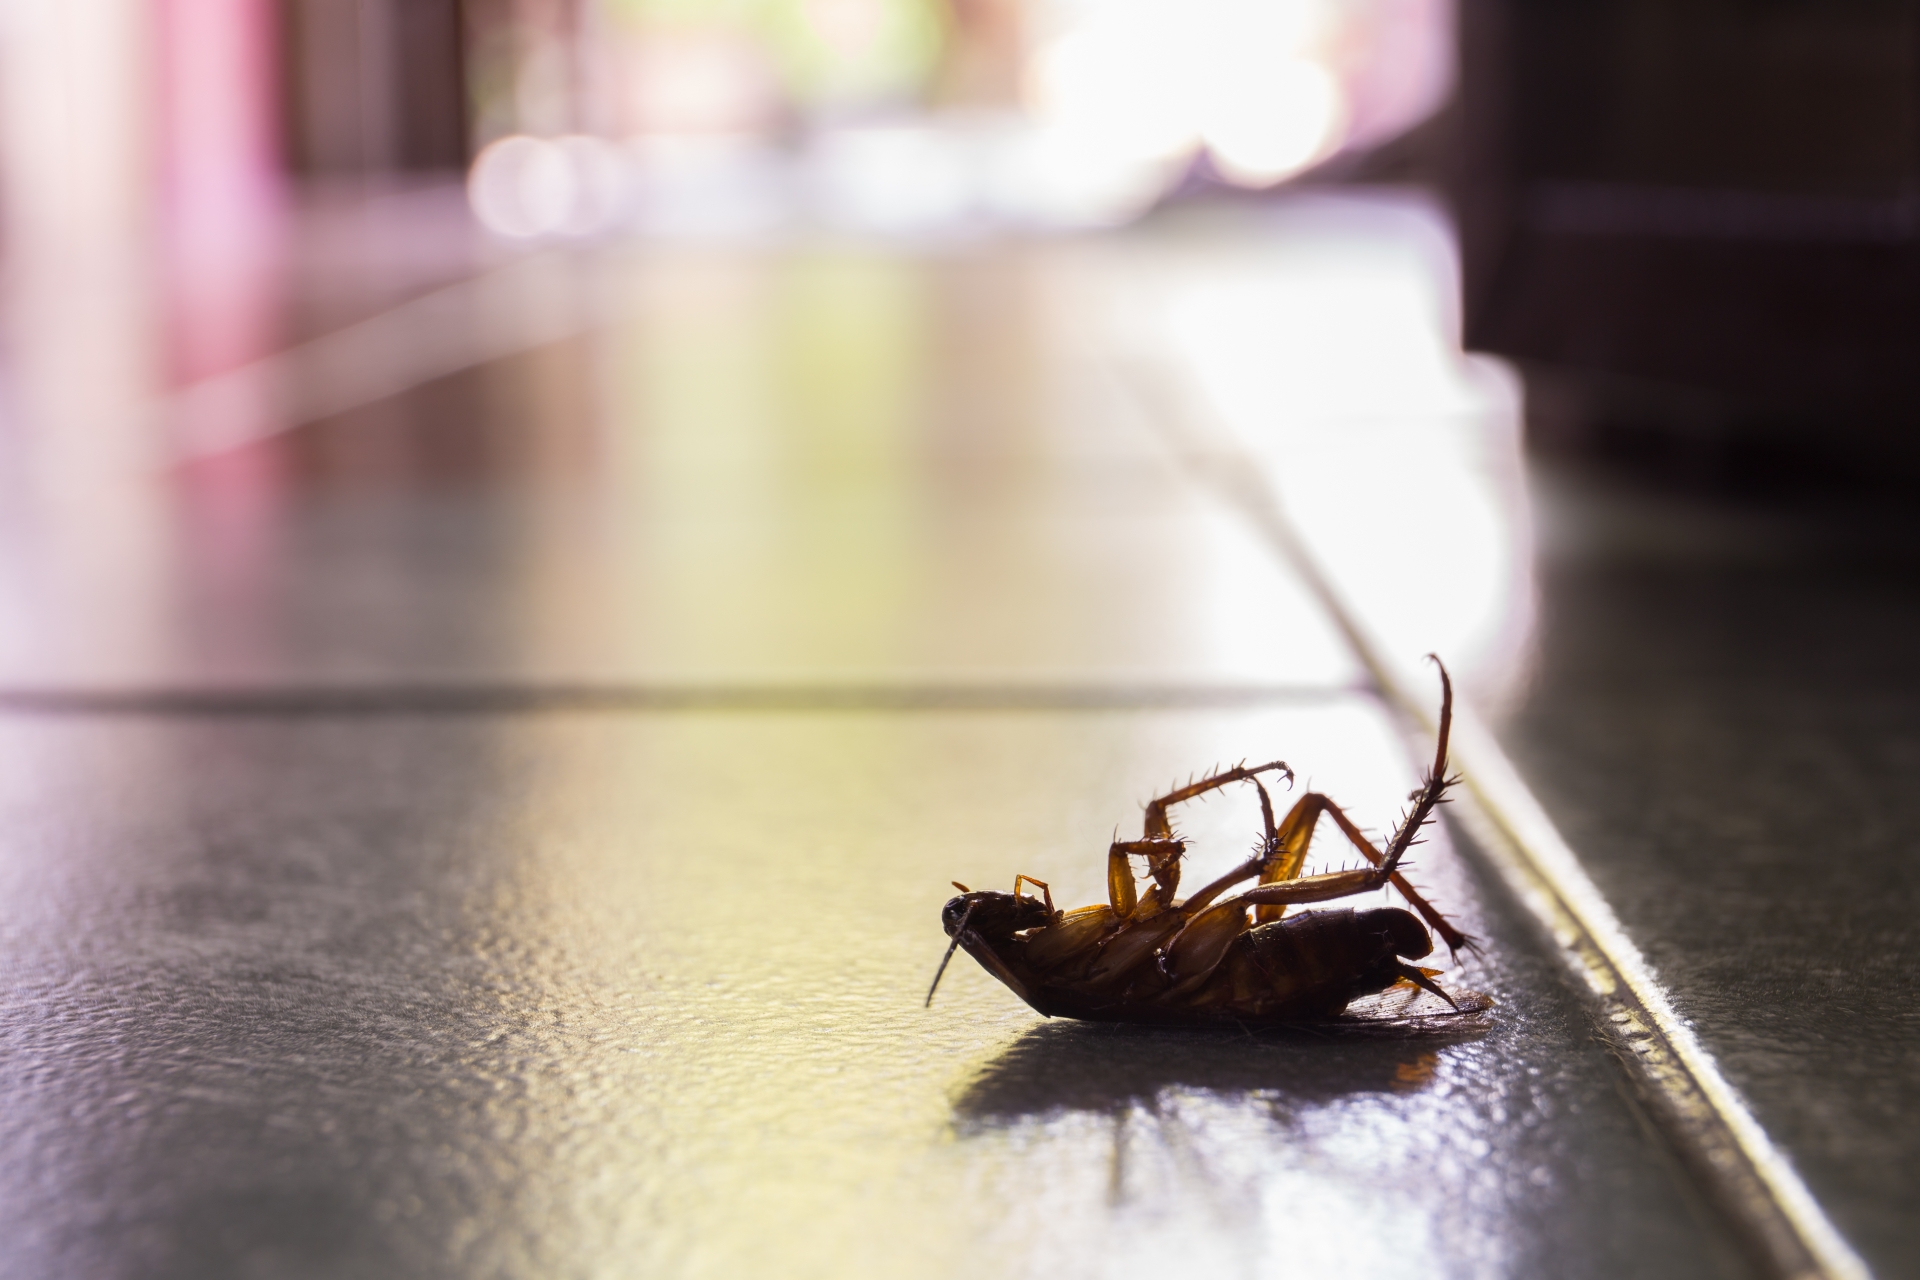 Cockroach Control, Pest Control in Moorgate, Liverpool Street, EC2. Call Now 020 8166 9746